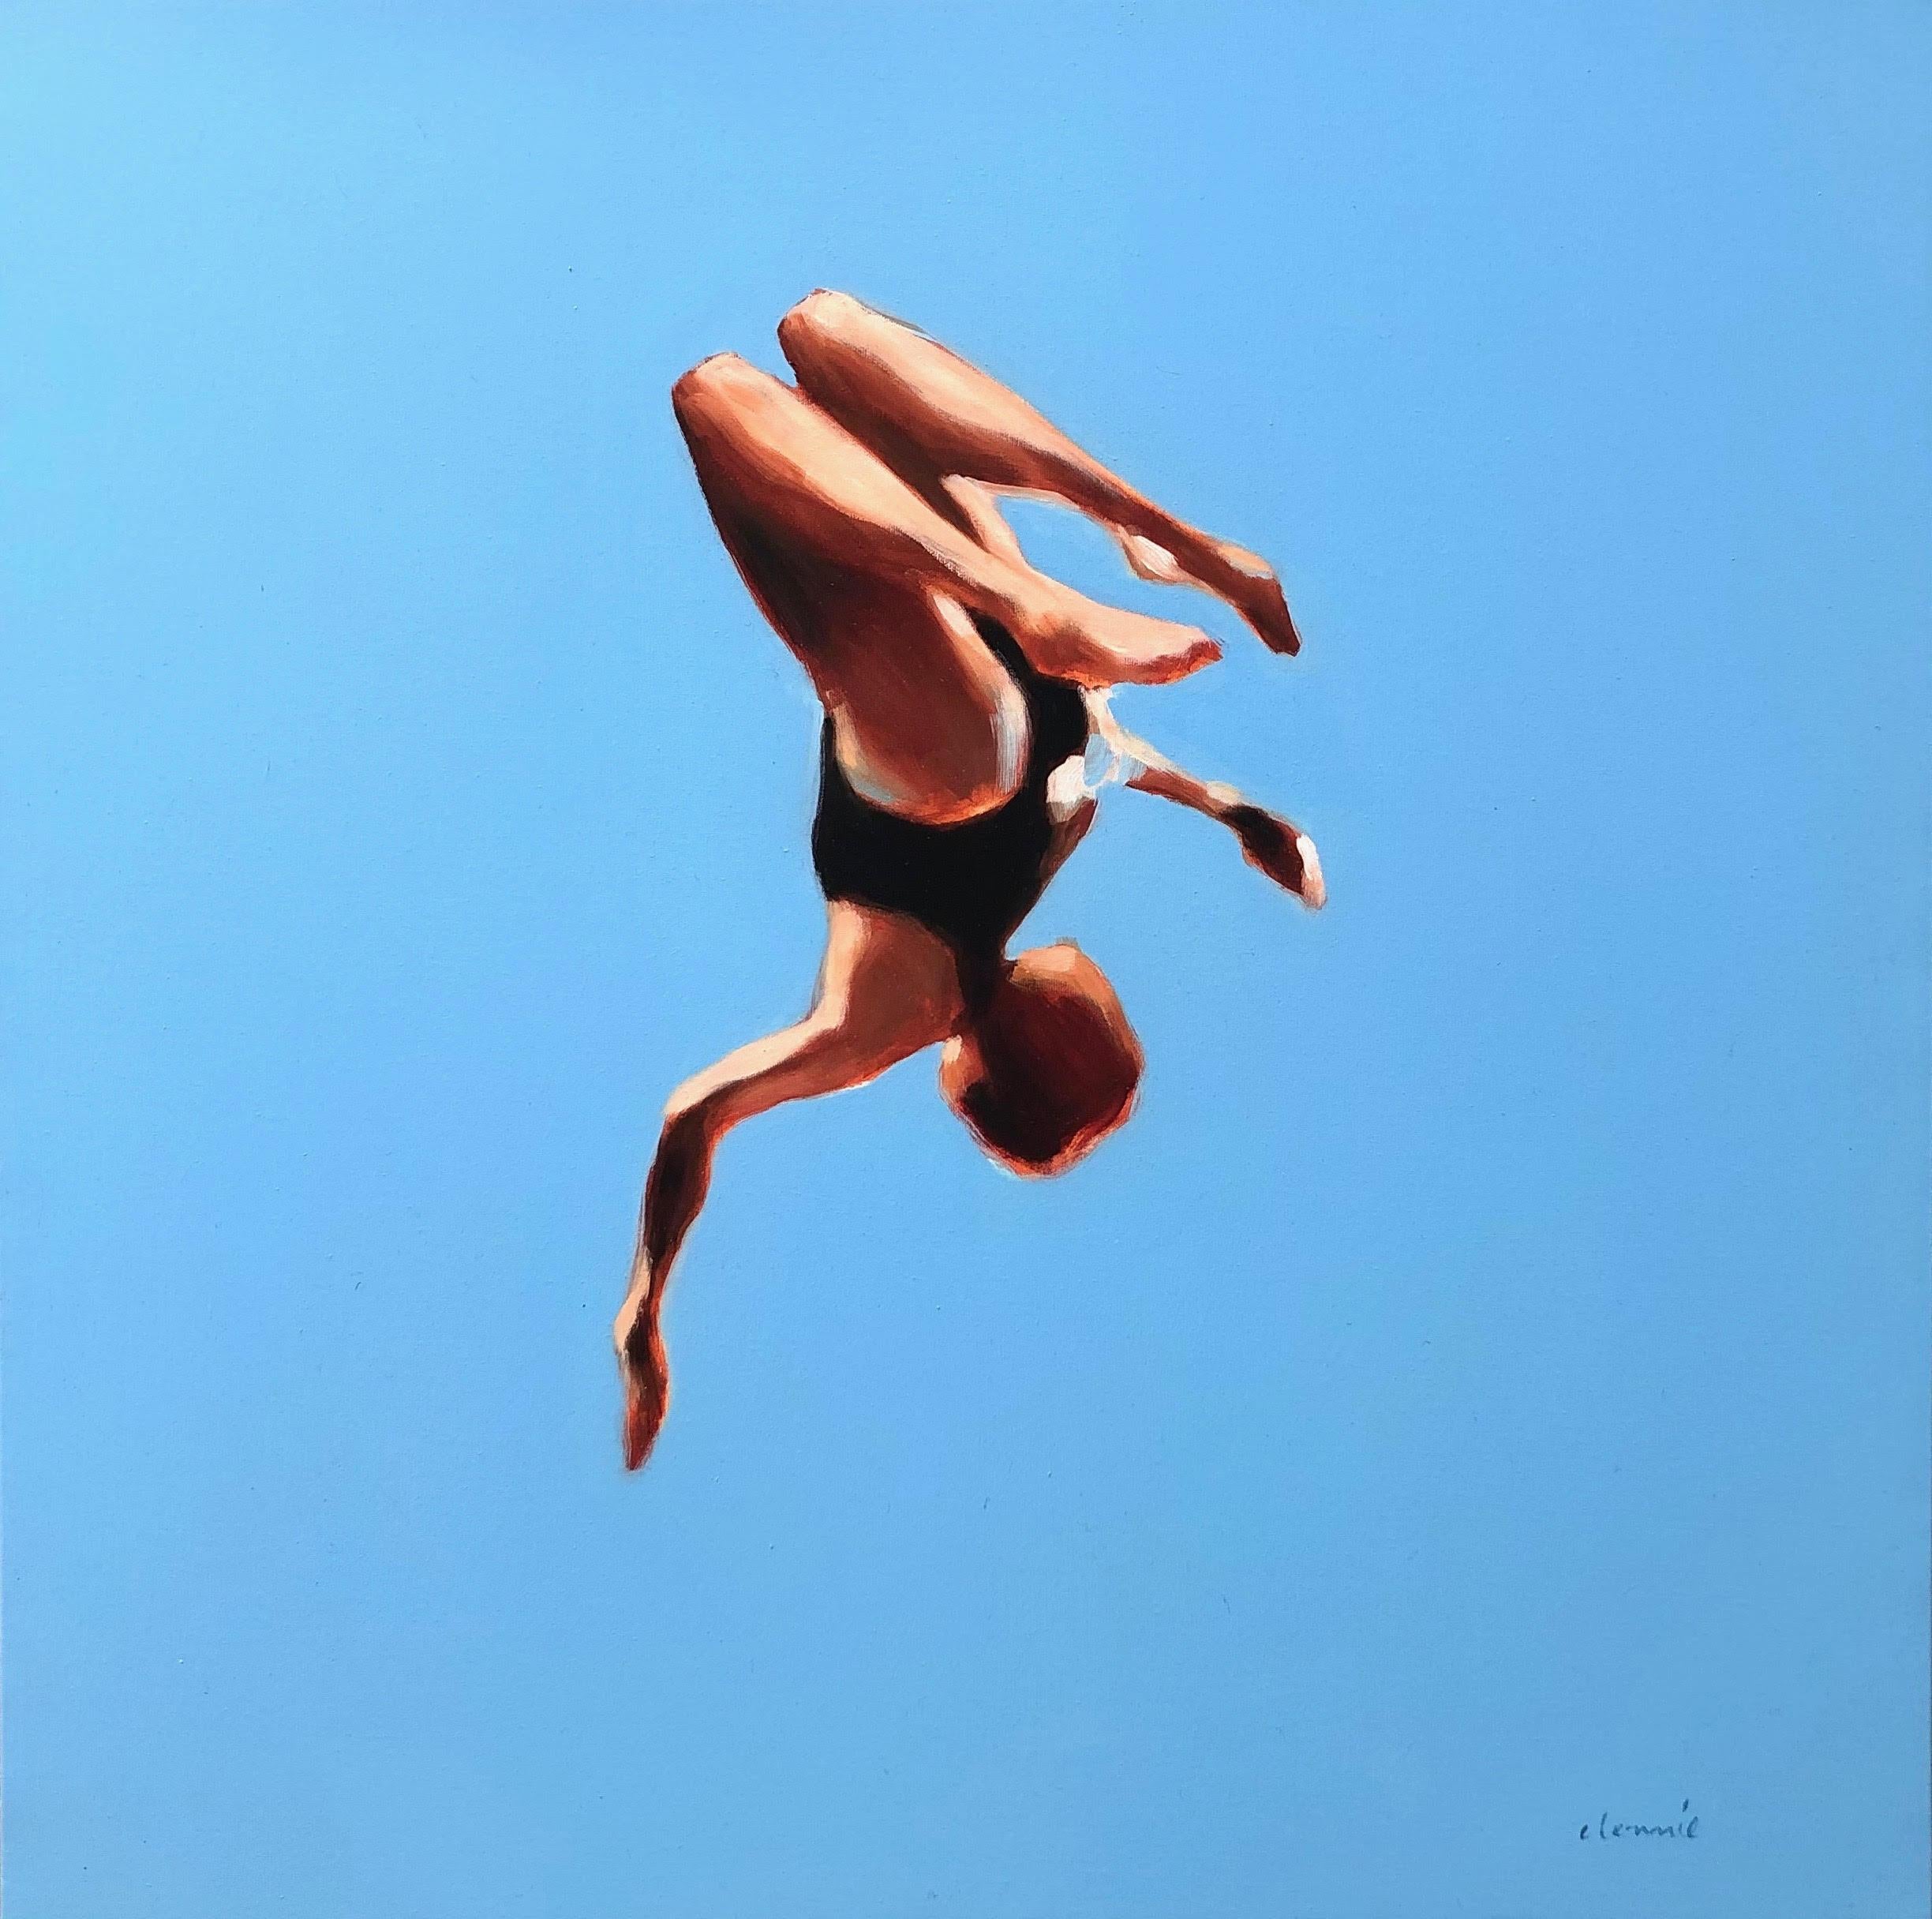 Elizabeth Lennie Figurative Painting - "Blue Skies 1" oil painting of a girl flipping in the air with blue sky behind